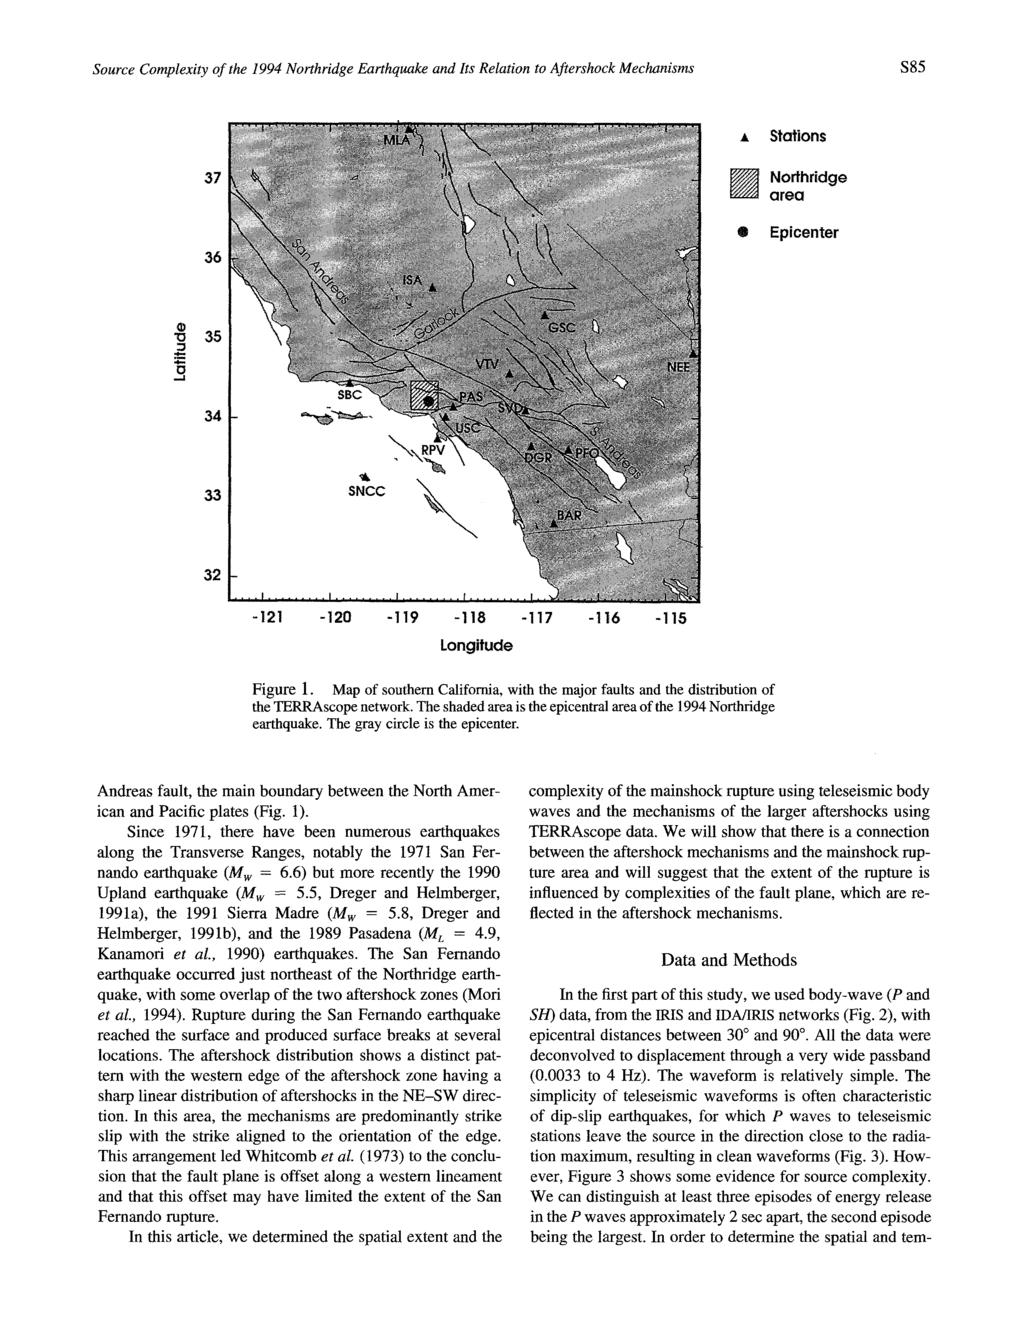 Source Complexity of the 1994 Northridge Earthquake and Its Relation to Afiershock Mechanisms S 85 37 36 A Stations PA Noflhridge area Epicenter "0 =_ a 35 34 33 32-121 -120 -I19-118 -117-116 -115